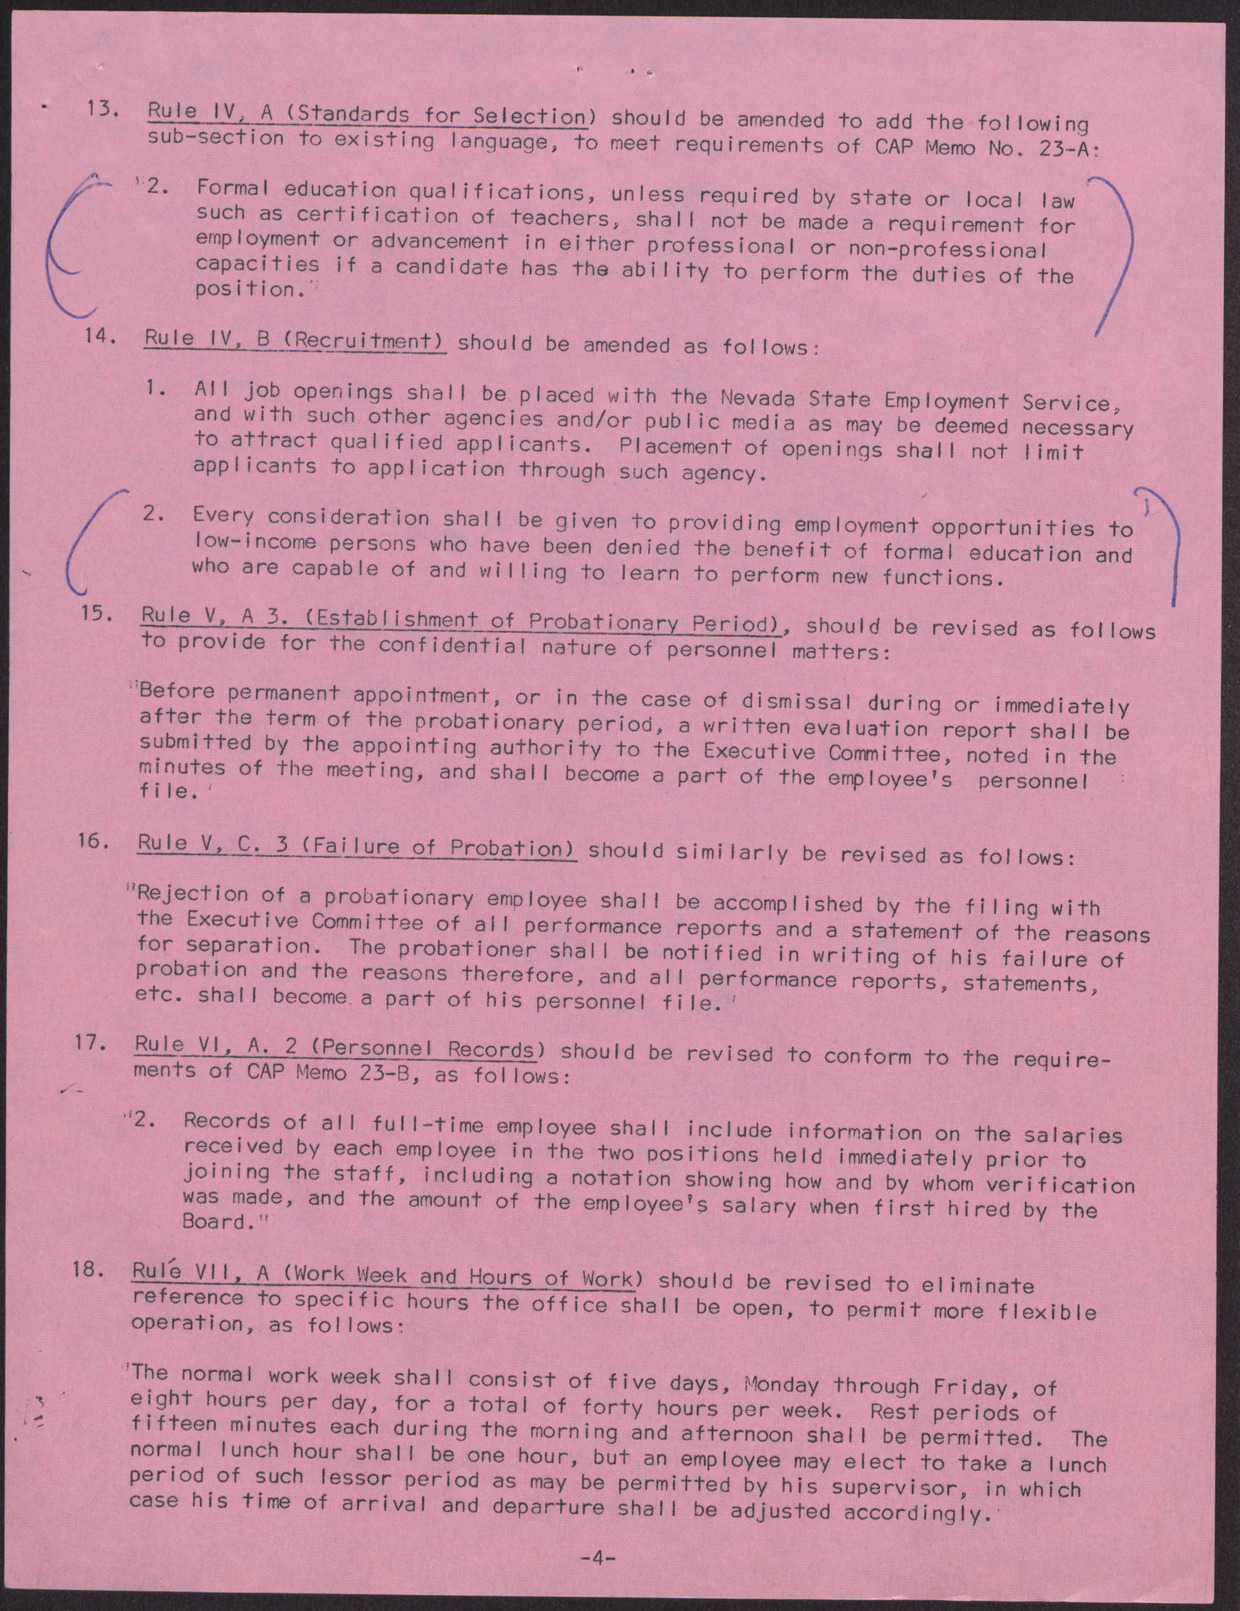 Recommendations for Changes in Personnel Policies and Practices (6 pages), May 15, 1967, page 4